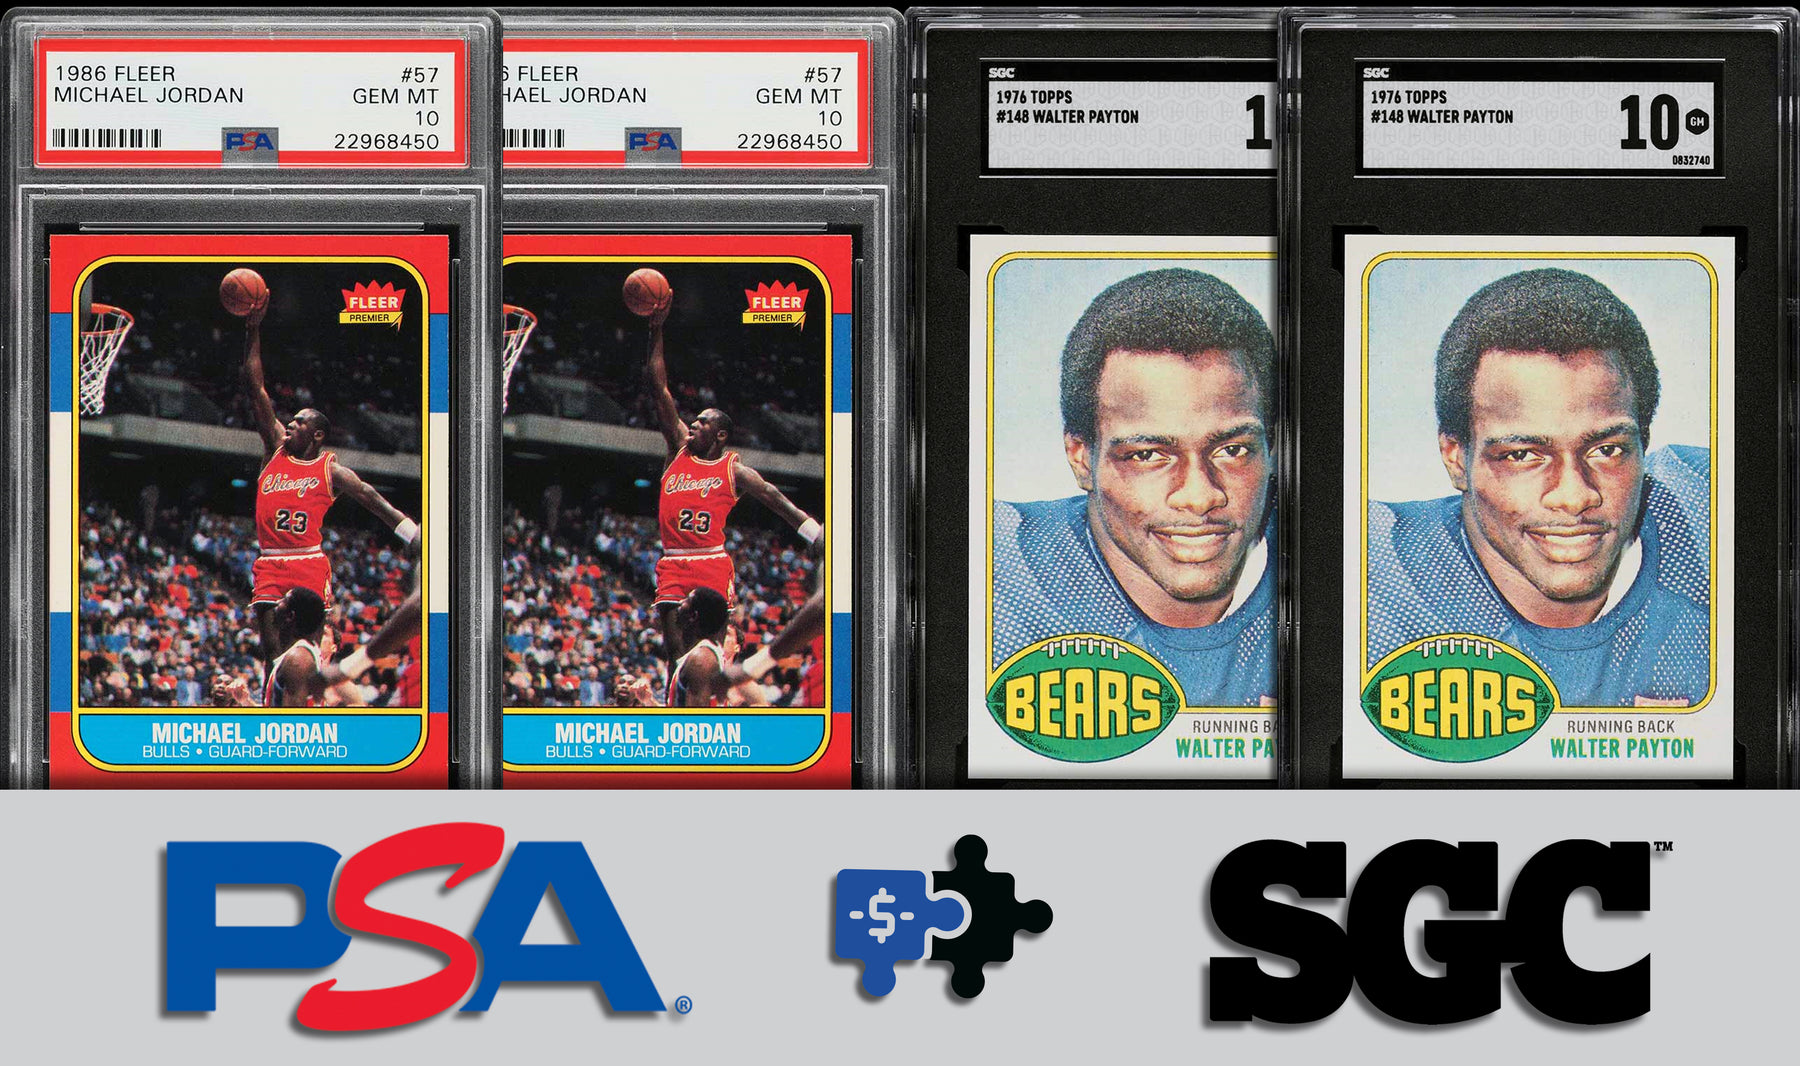 Image featuring two copies of the 1986 Fleer Michael Jordan rookie card on the left, encased in PSA slabs, and two copies of the 1976 Walter Payton rookie card on the right, in SGC slabs. Below the cards, the logos of PSA and SGC are displayed